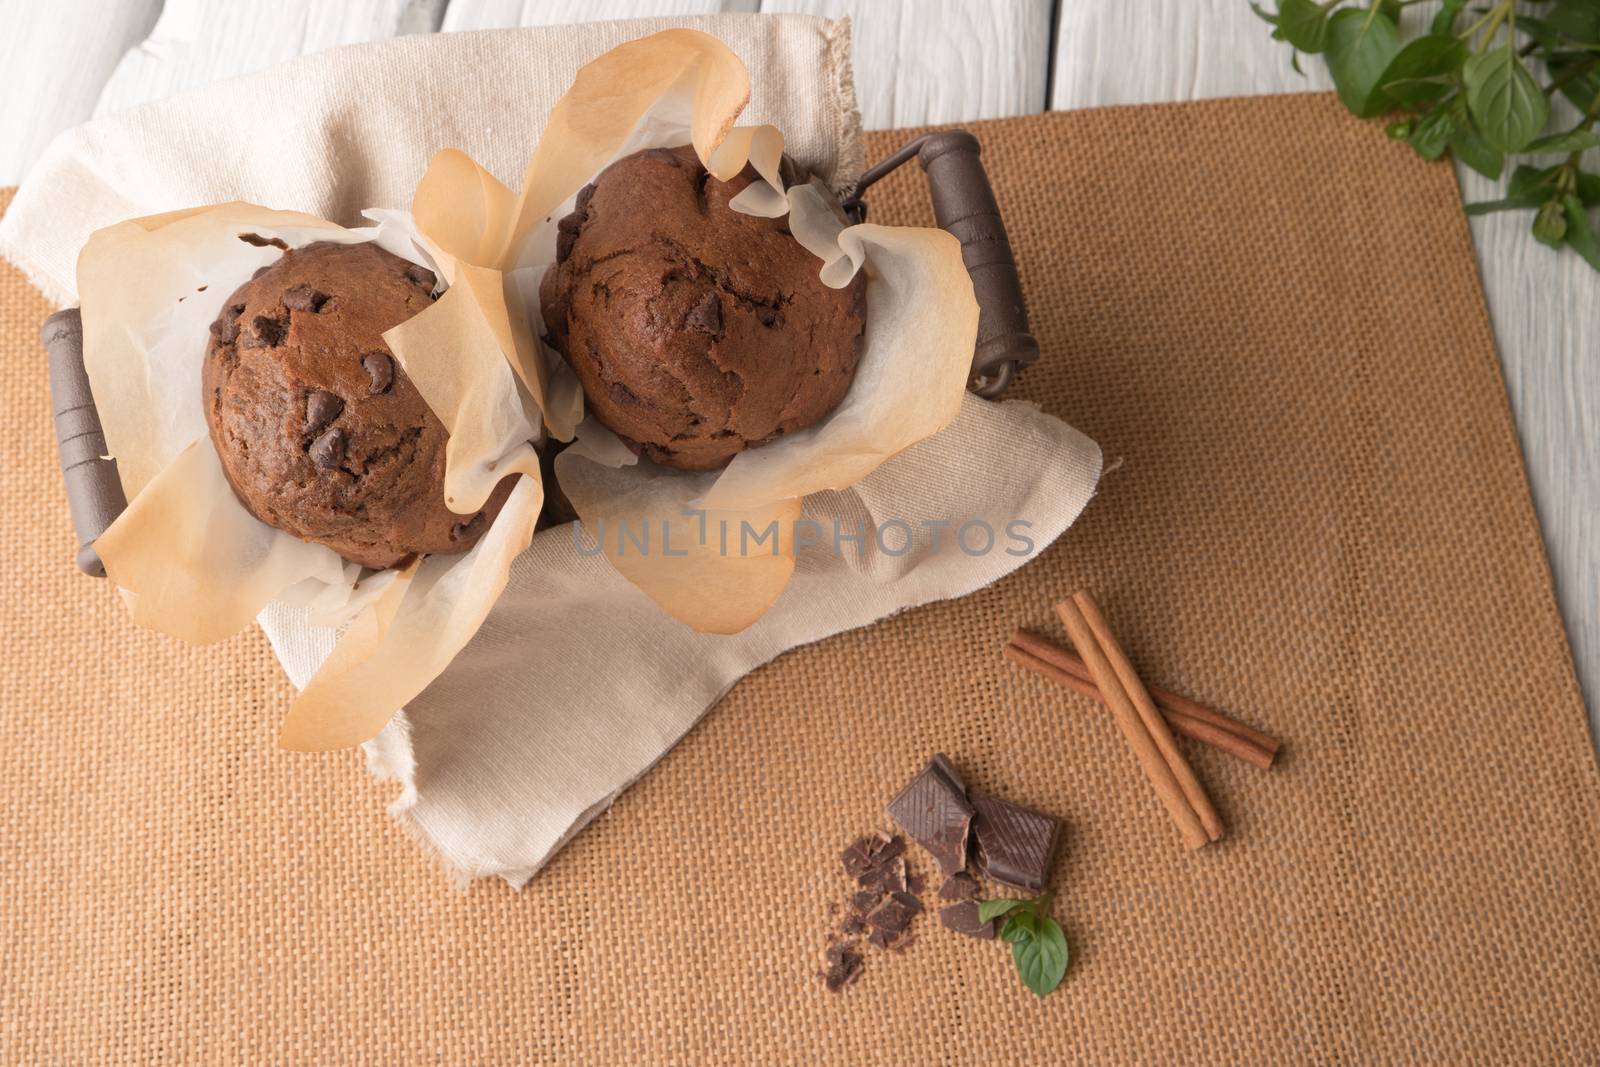 Chocolate muffins by AnaMarques